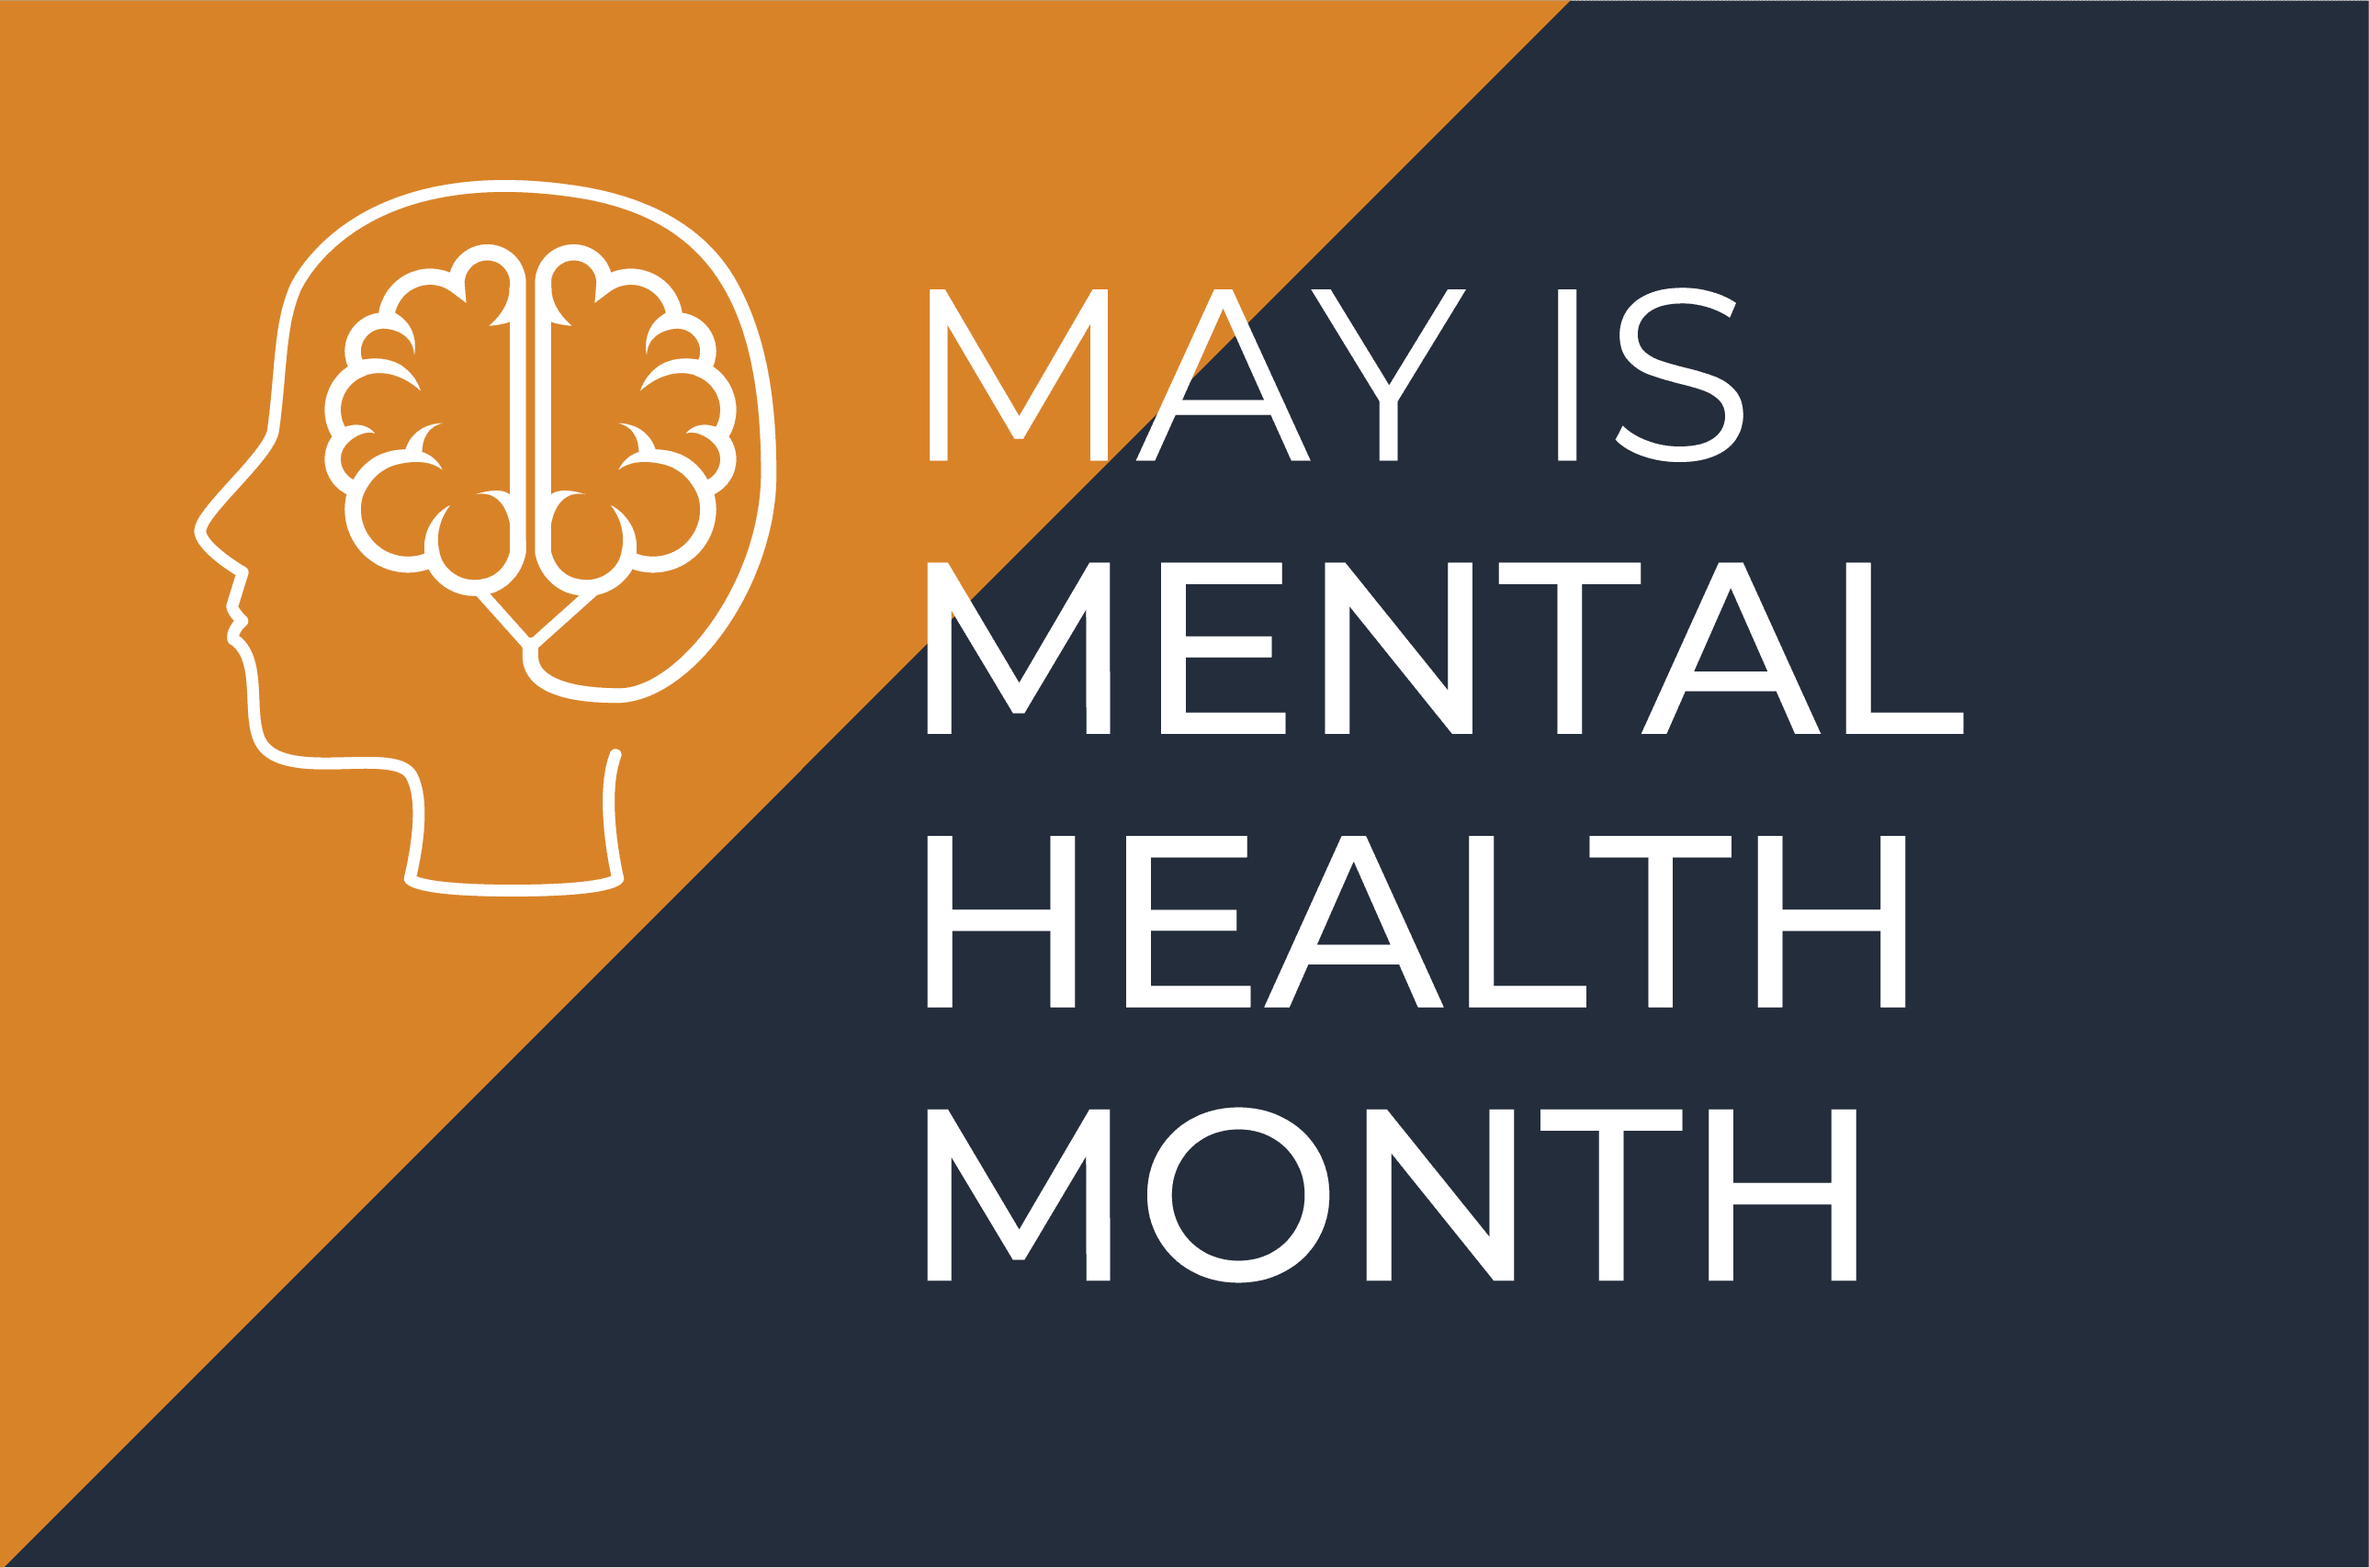 May is Mental Health Month